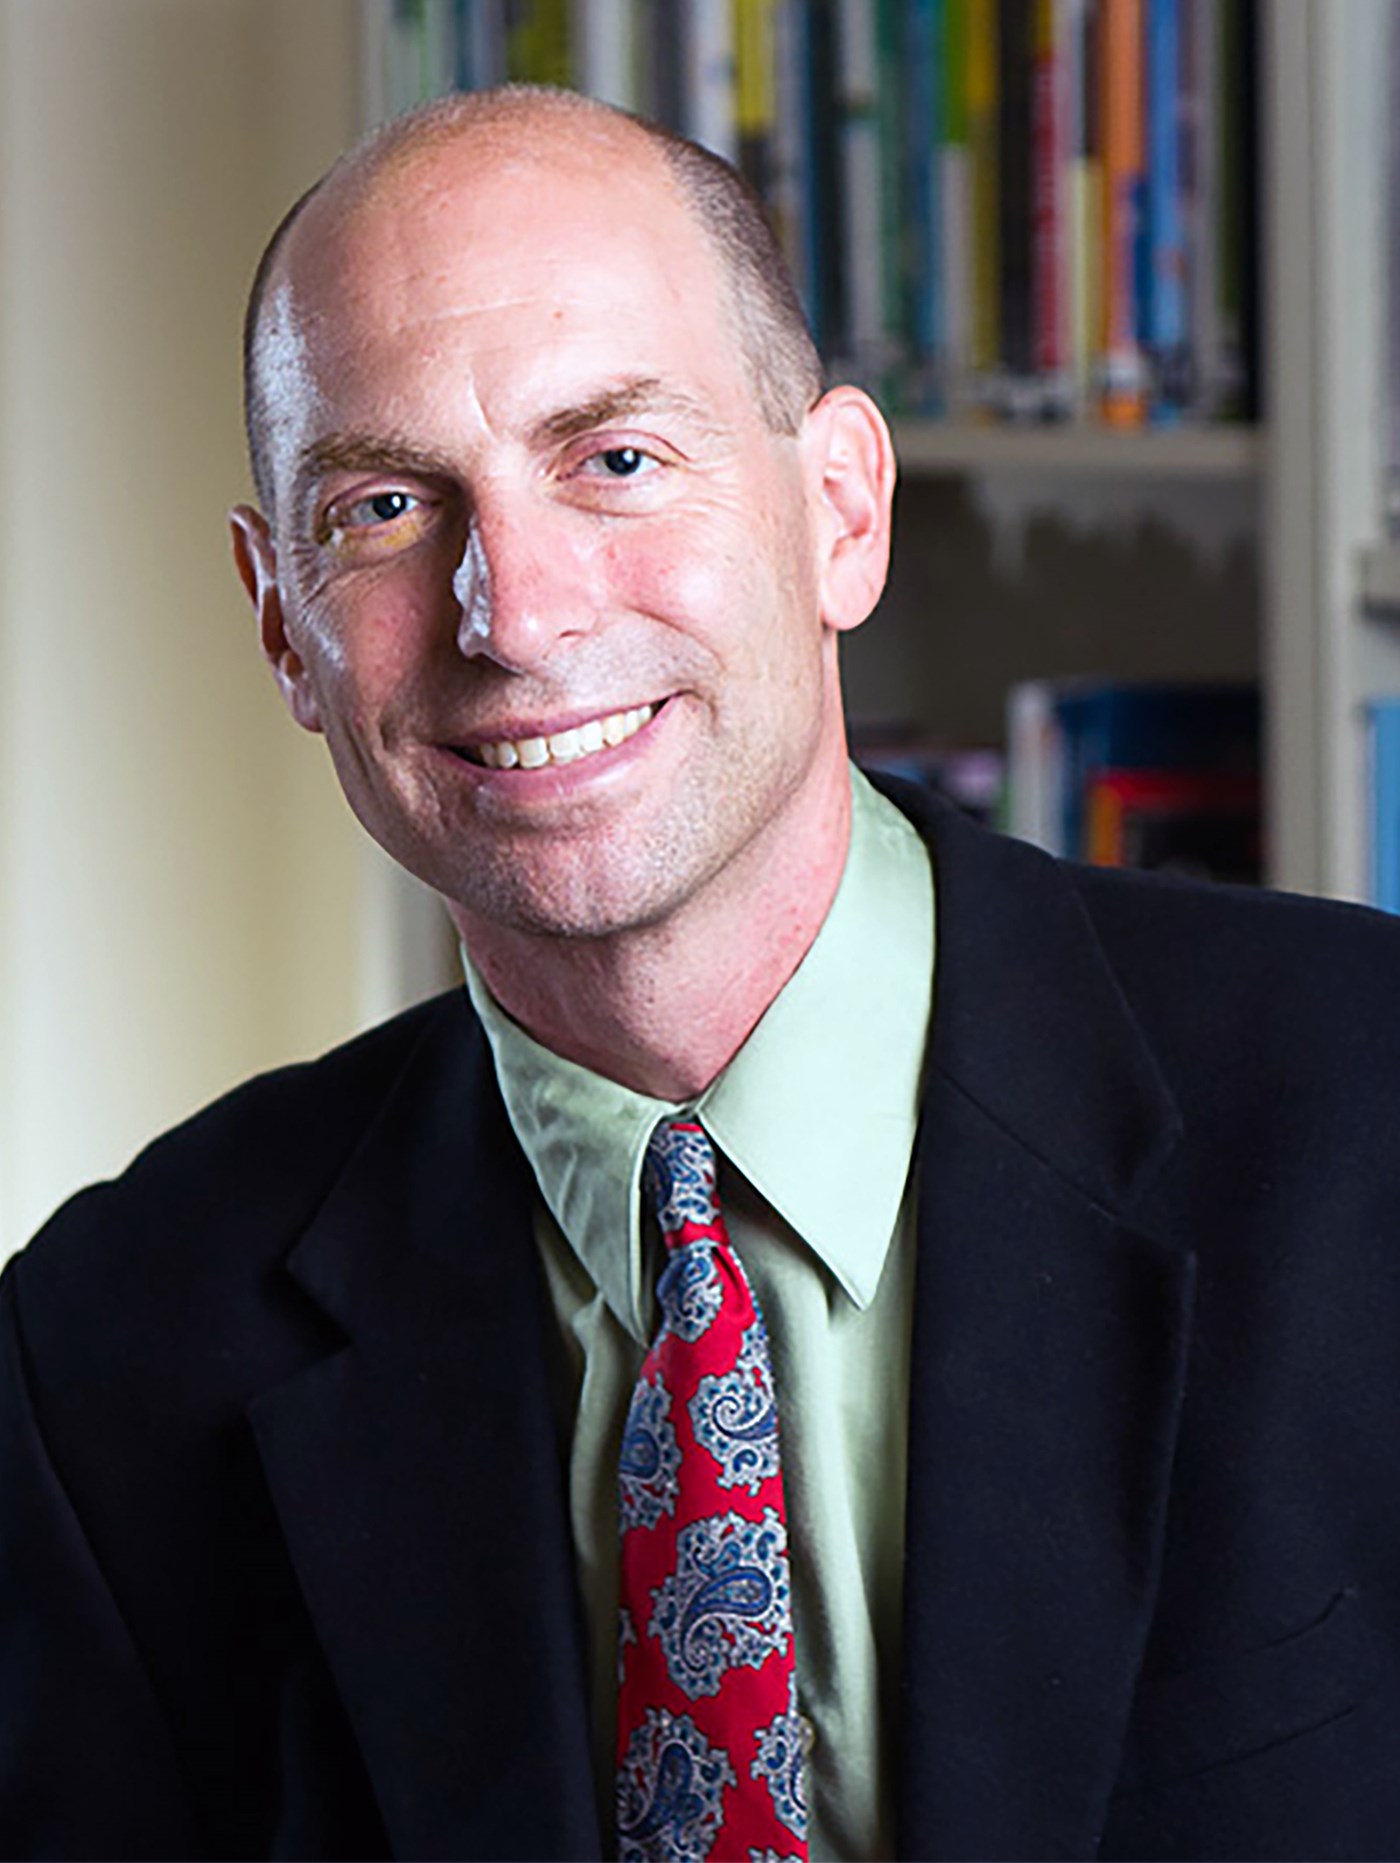 Joel Tickner is a Professor in the Public Health Department at UMass Lowell.